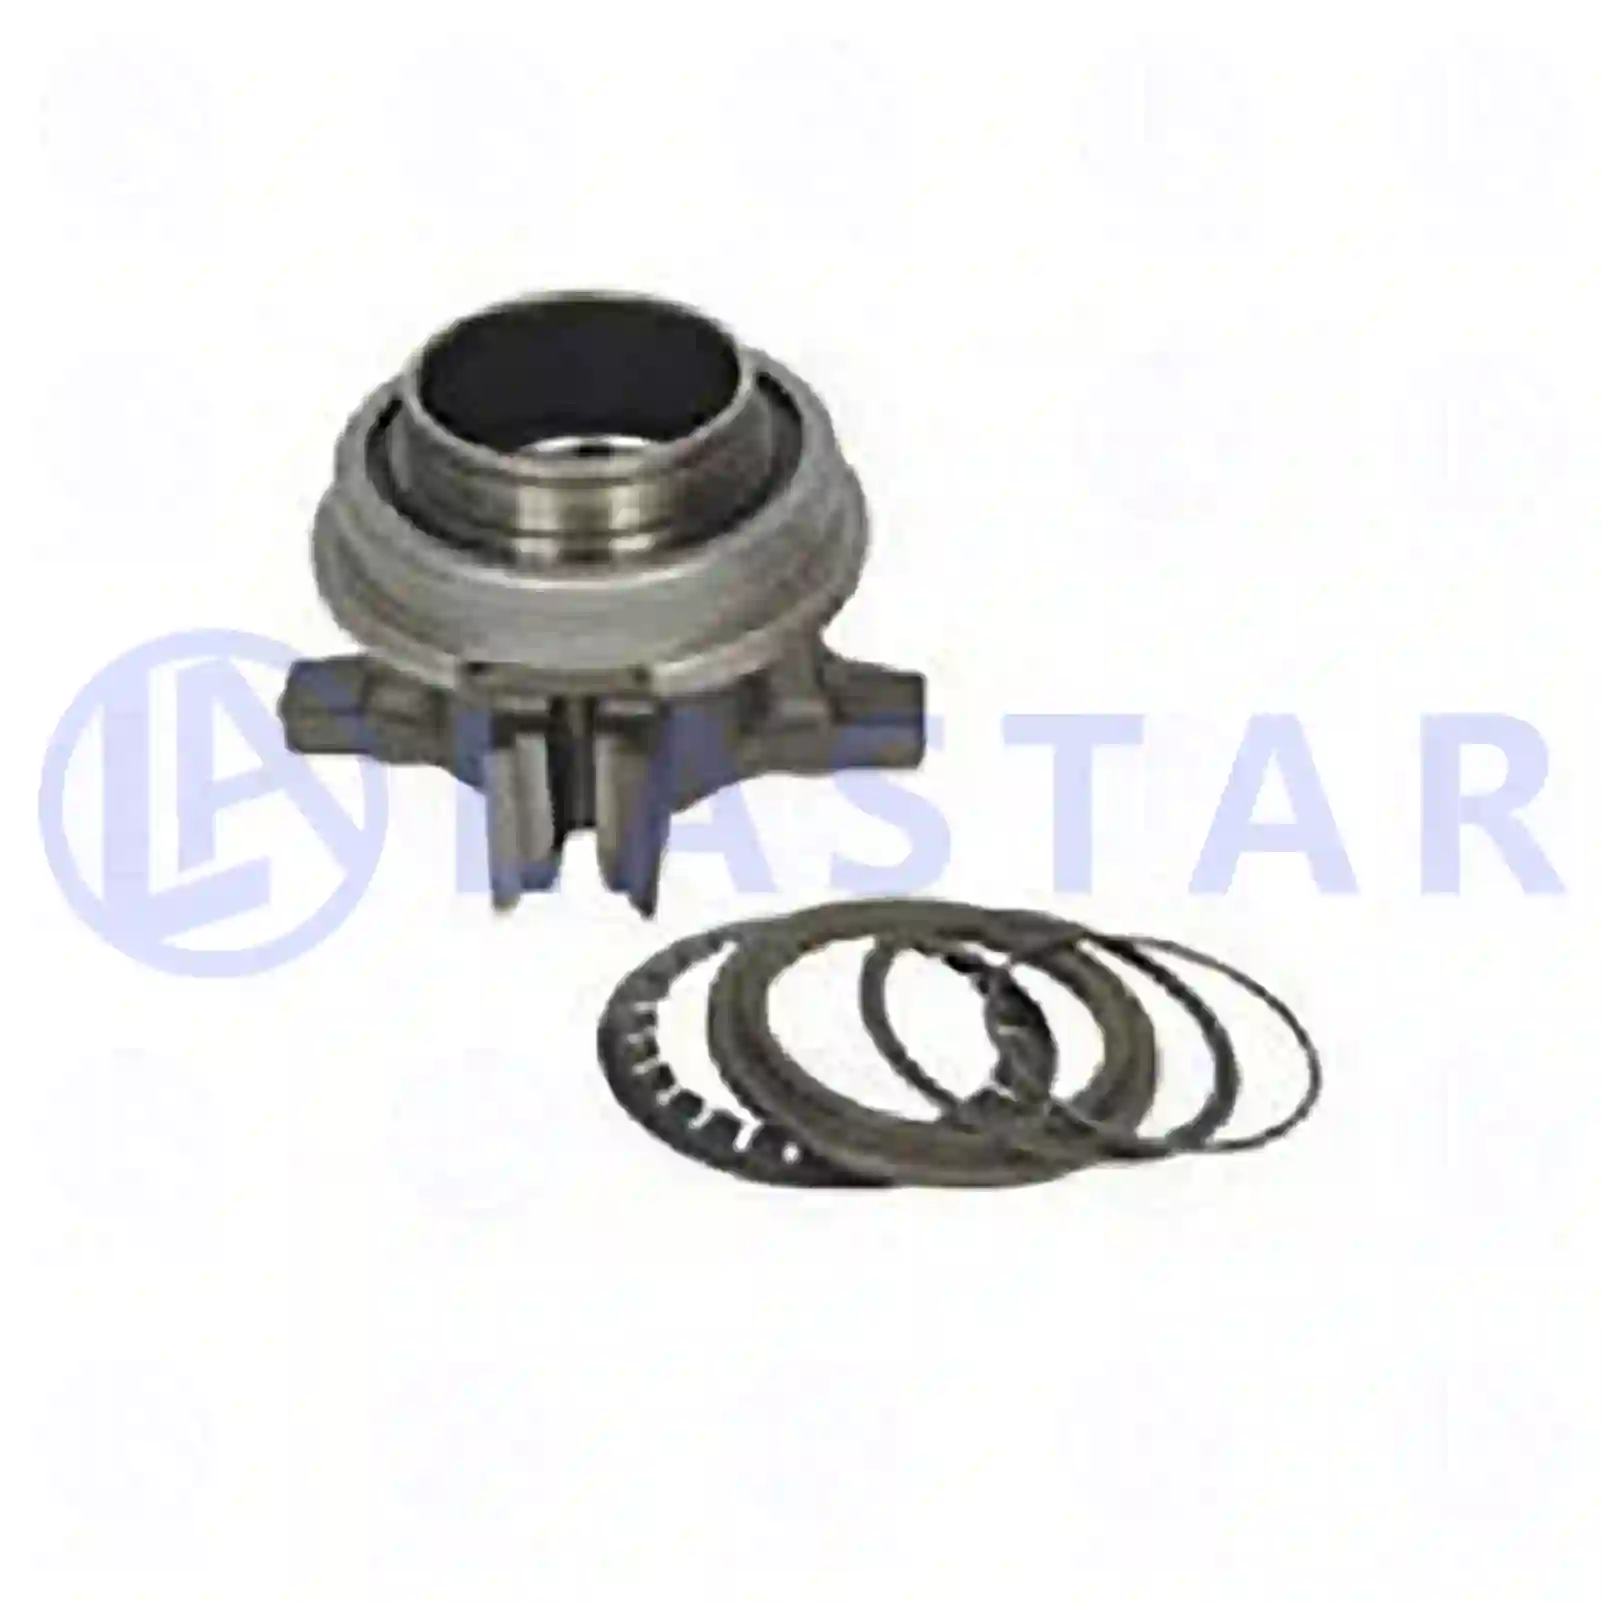  Release bearing || Lastar Spare Part | Truck Spare Parts, Auotomotive Spare Parts